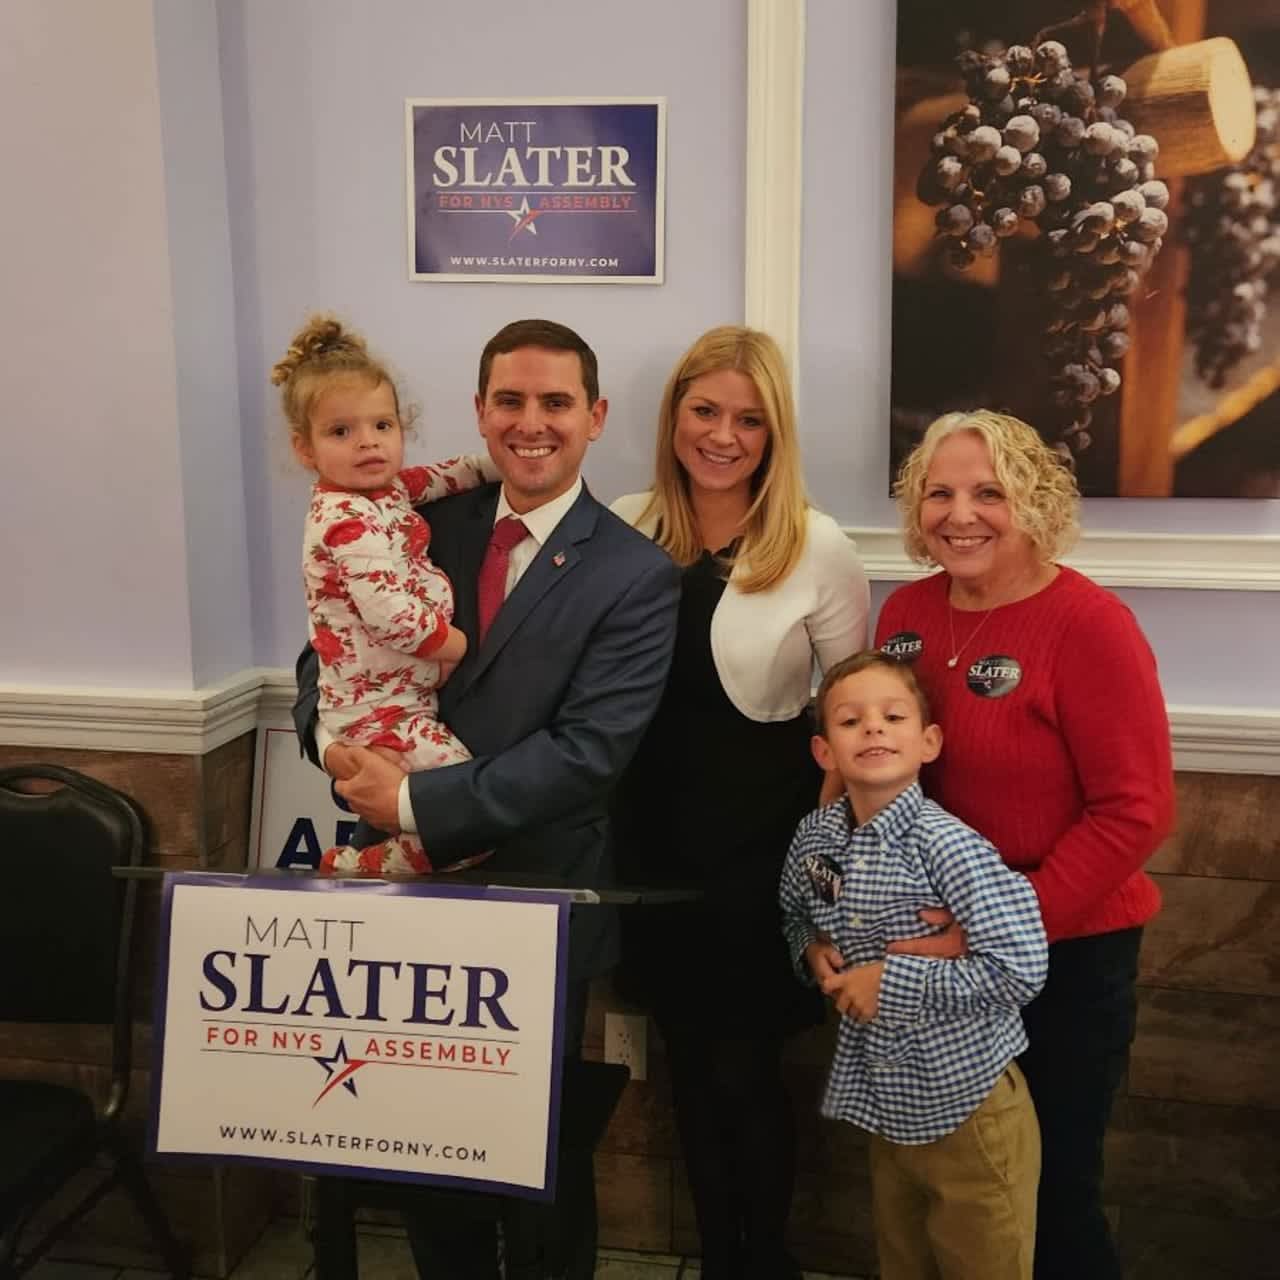 Yorktown Supervisor Matt Slater celebrates his win with his family (L-R) daughter Elizabeth, wife Kellie, mother Kathy, and son Charlie.